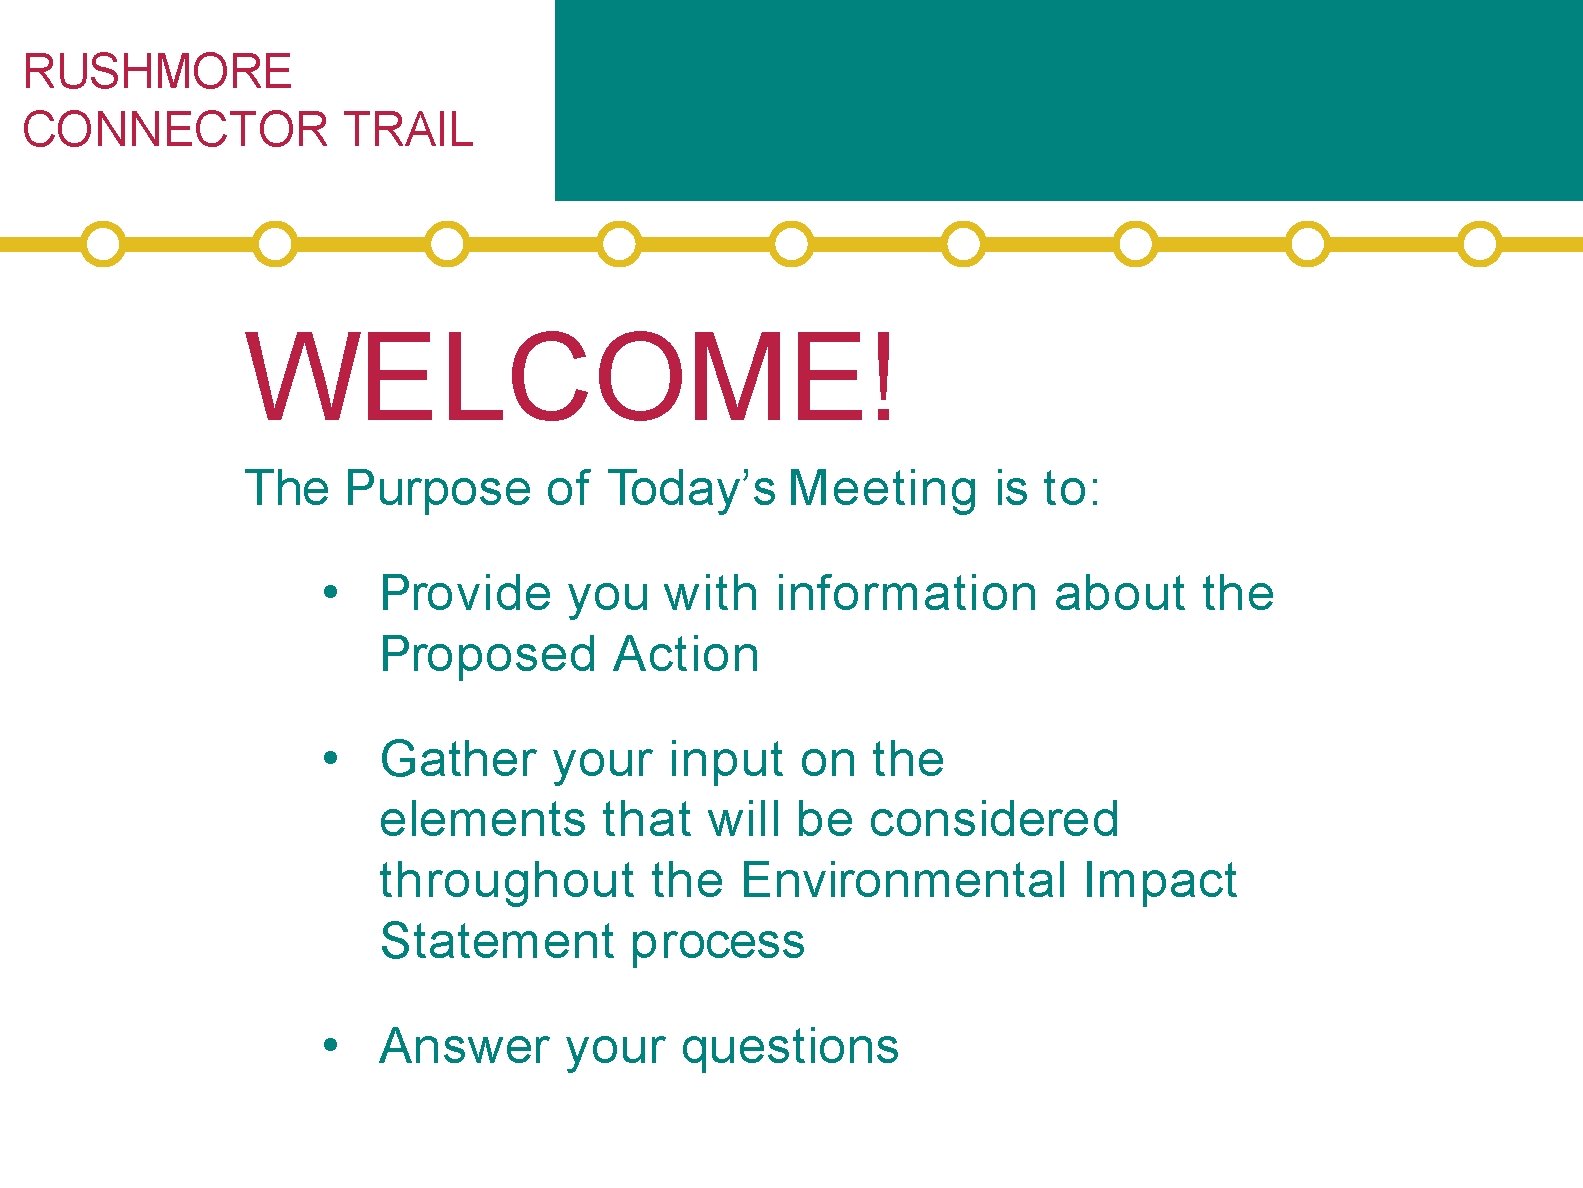 RUSHMORE CONNECTOR TRAIL WELCOME! The Purpose of Today’s Meeting is to: • Provide you